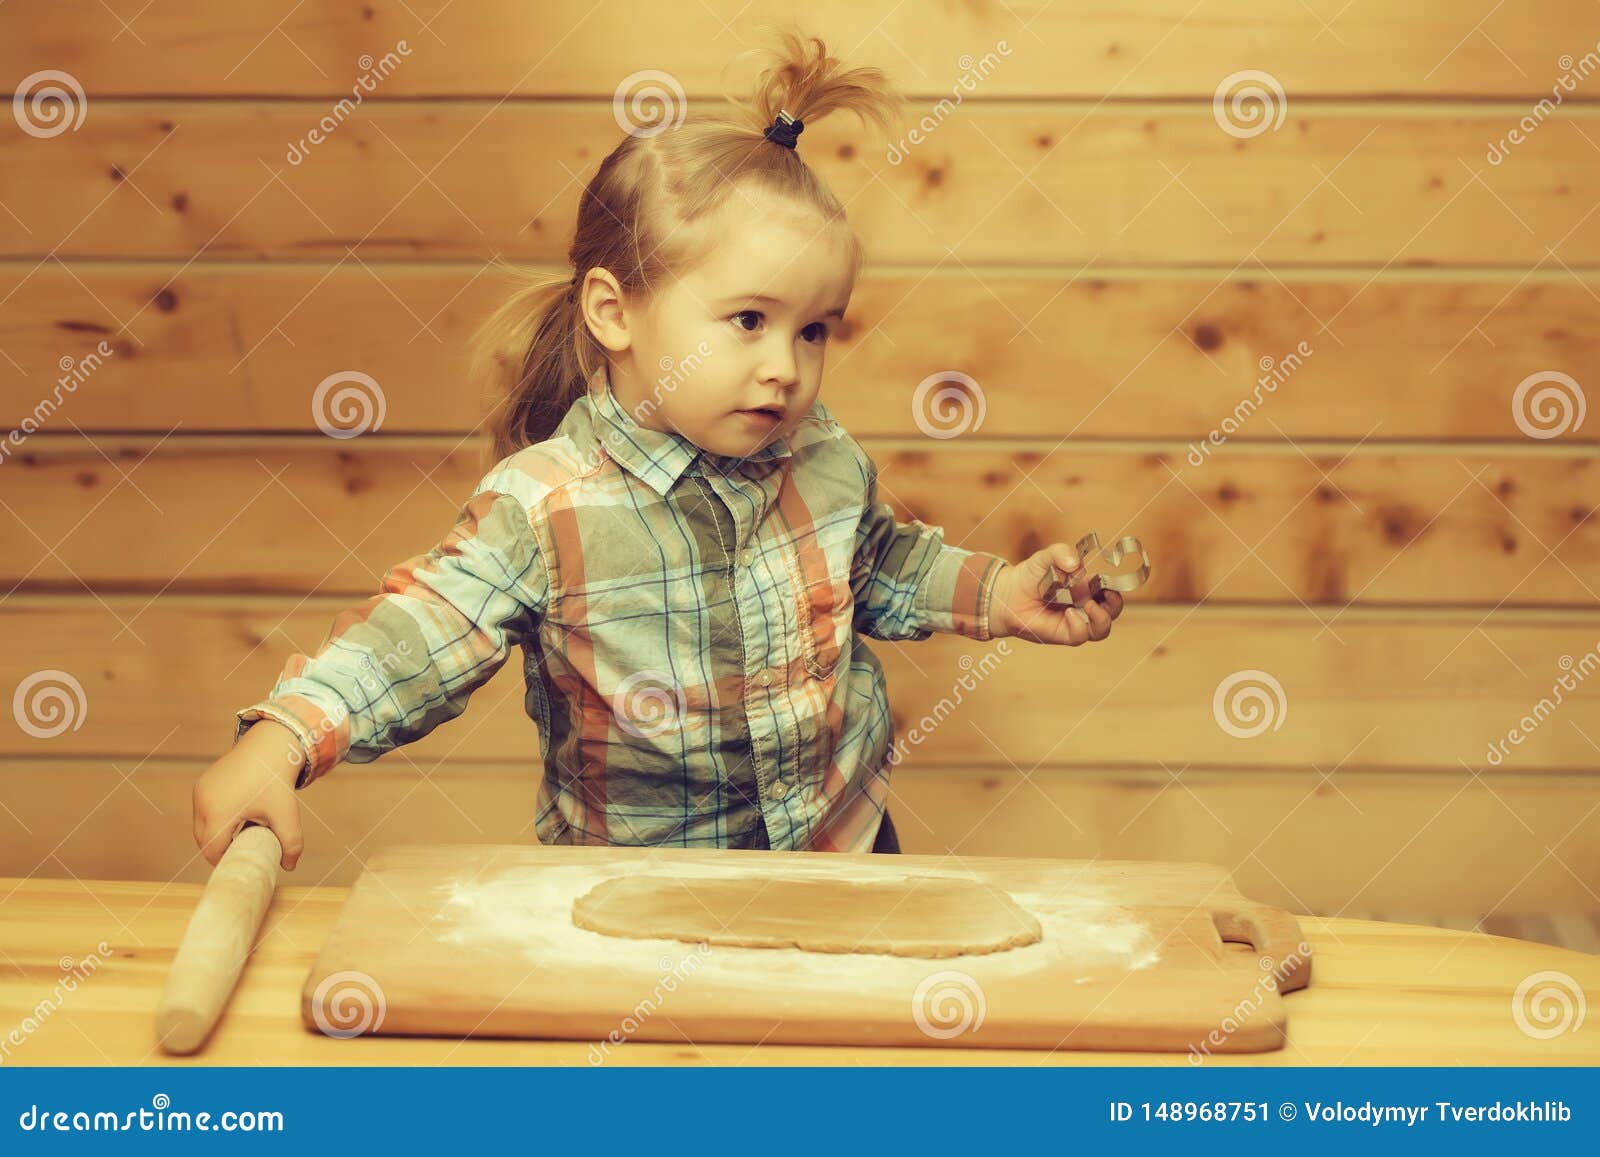 Crian?a bonito que cozinha com massa e farinha, molde met?lico das posses. Adorable small child chef or cute baby boy in fashionable chekered shirt cooking on board flour and dough holds metallic mold for cookies on wooden background.